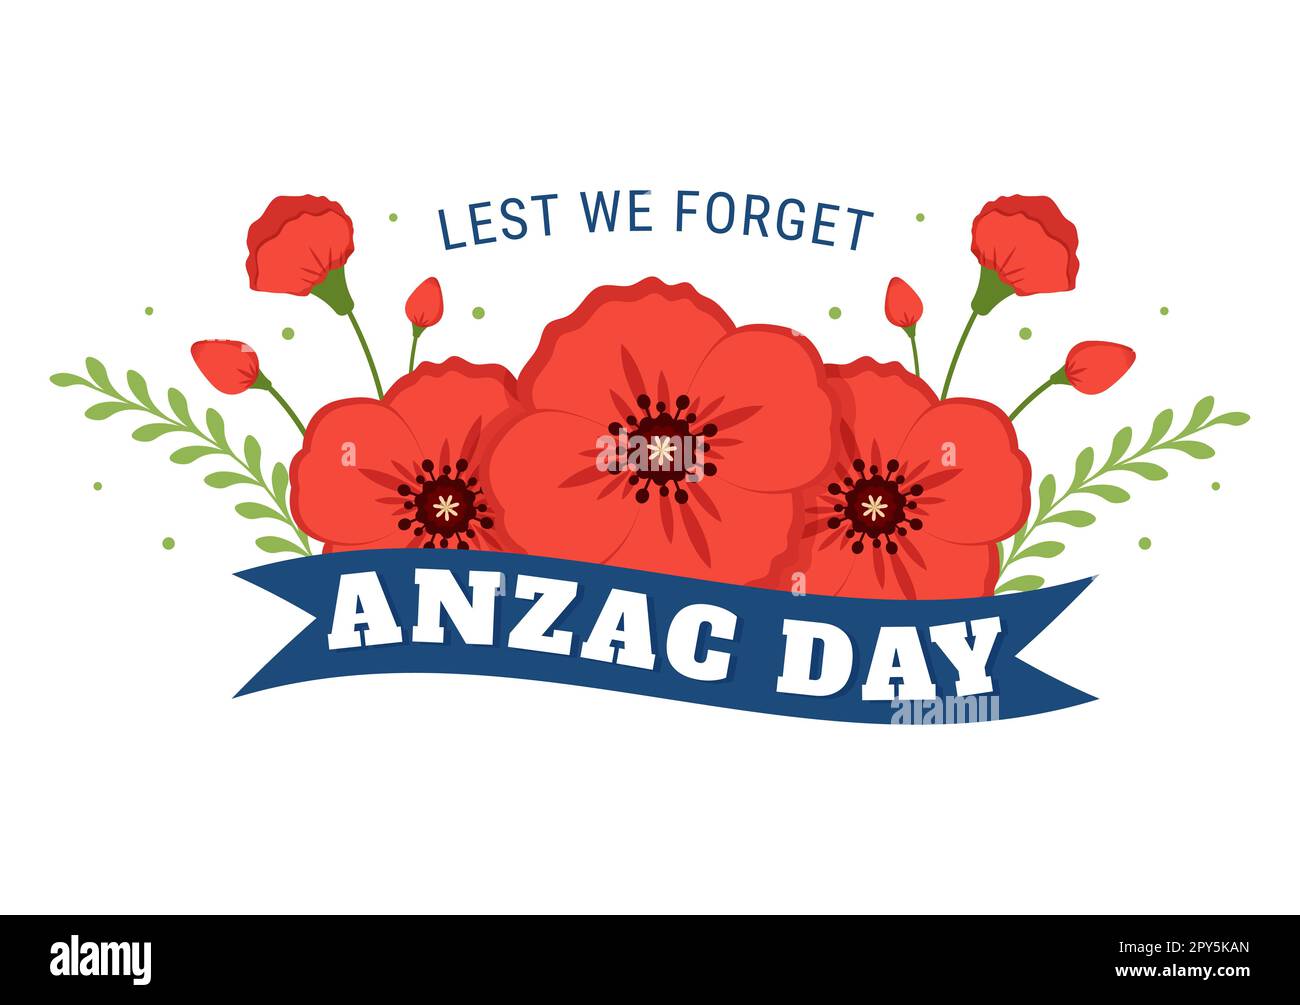 Anzac Day of Lest We Forget Illustration with Remembrance Soldier Paying Respect and Red Poppy Flower in Flat Hand Drawn for Landing Page Templates Stock Photo